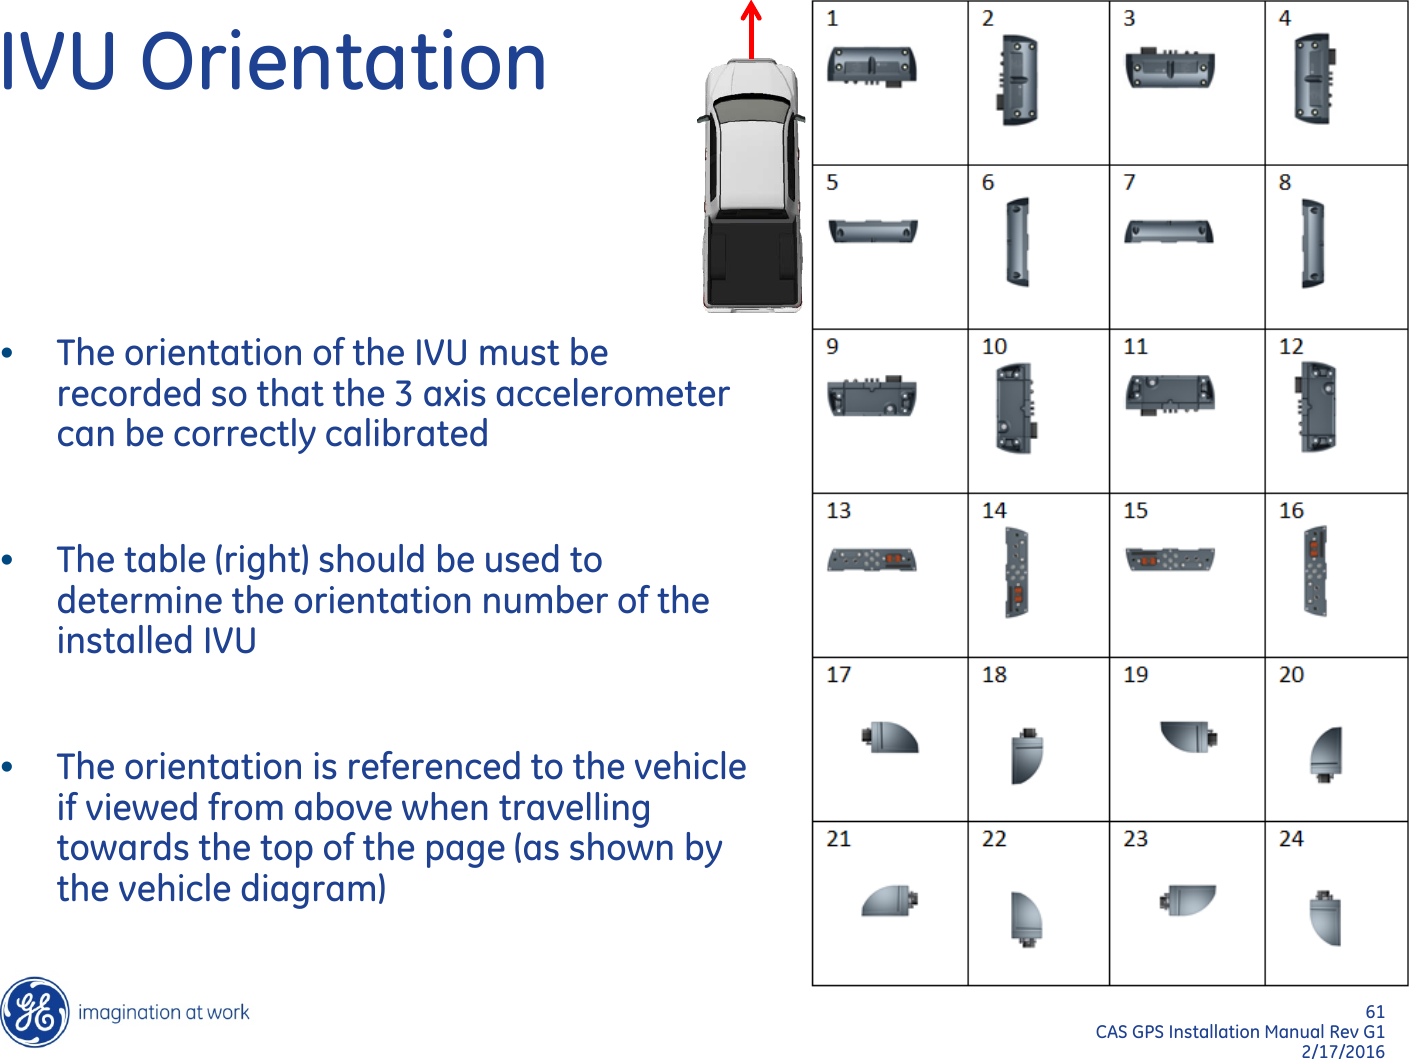 61  CAS GPS Installation Manual Rev G1 2/17/2016 IVU Orientation •The orientation of the IVU must be recorded so that the 3 axis accelerometer can be correctly calibrated  •The table (right) should be used to determine the orientation number of the installed IVU  •The orientation is referenced to the vehicle if viewed from above when travelling towards the top of the page (as shown by the vehicle diagram) 